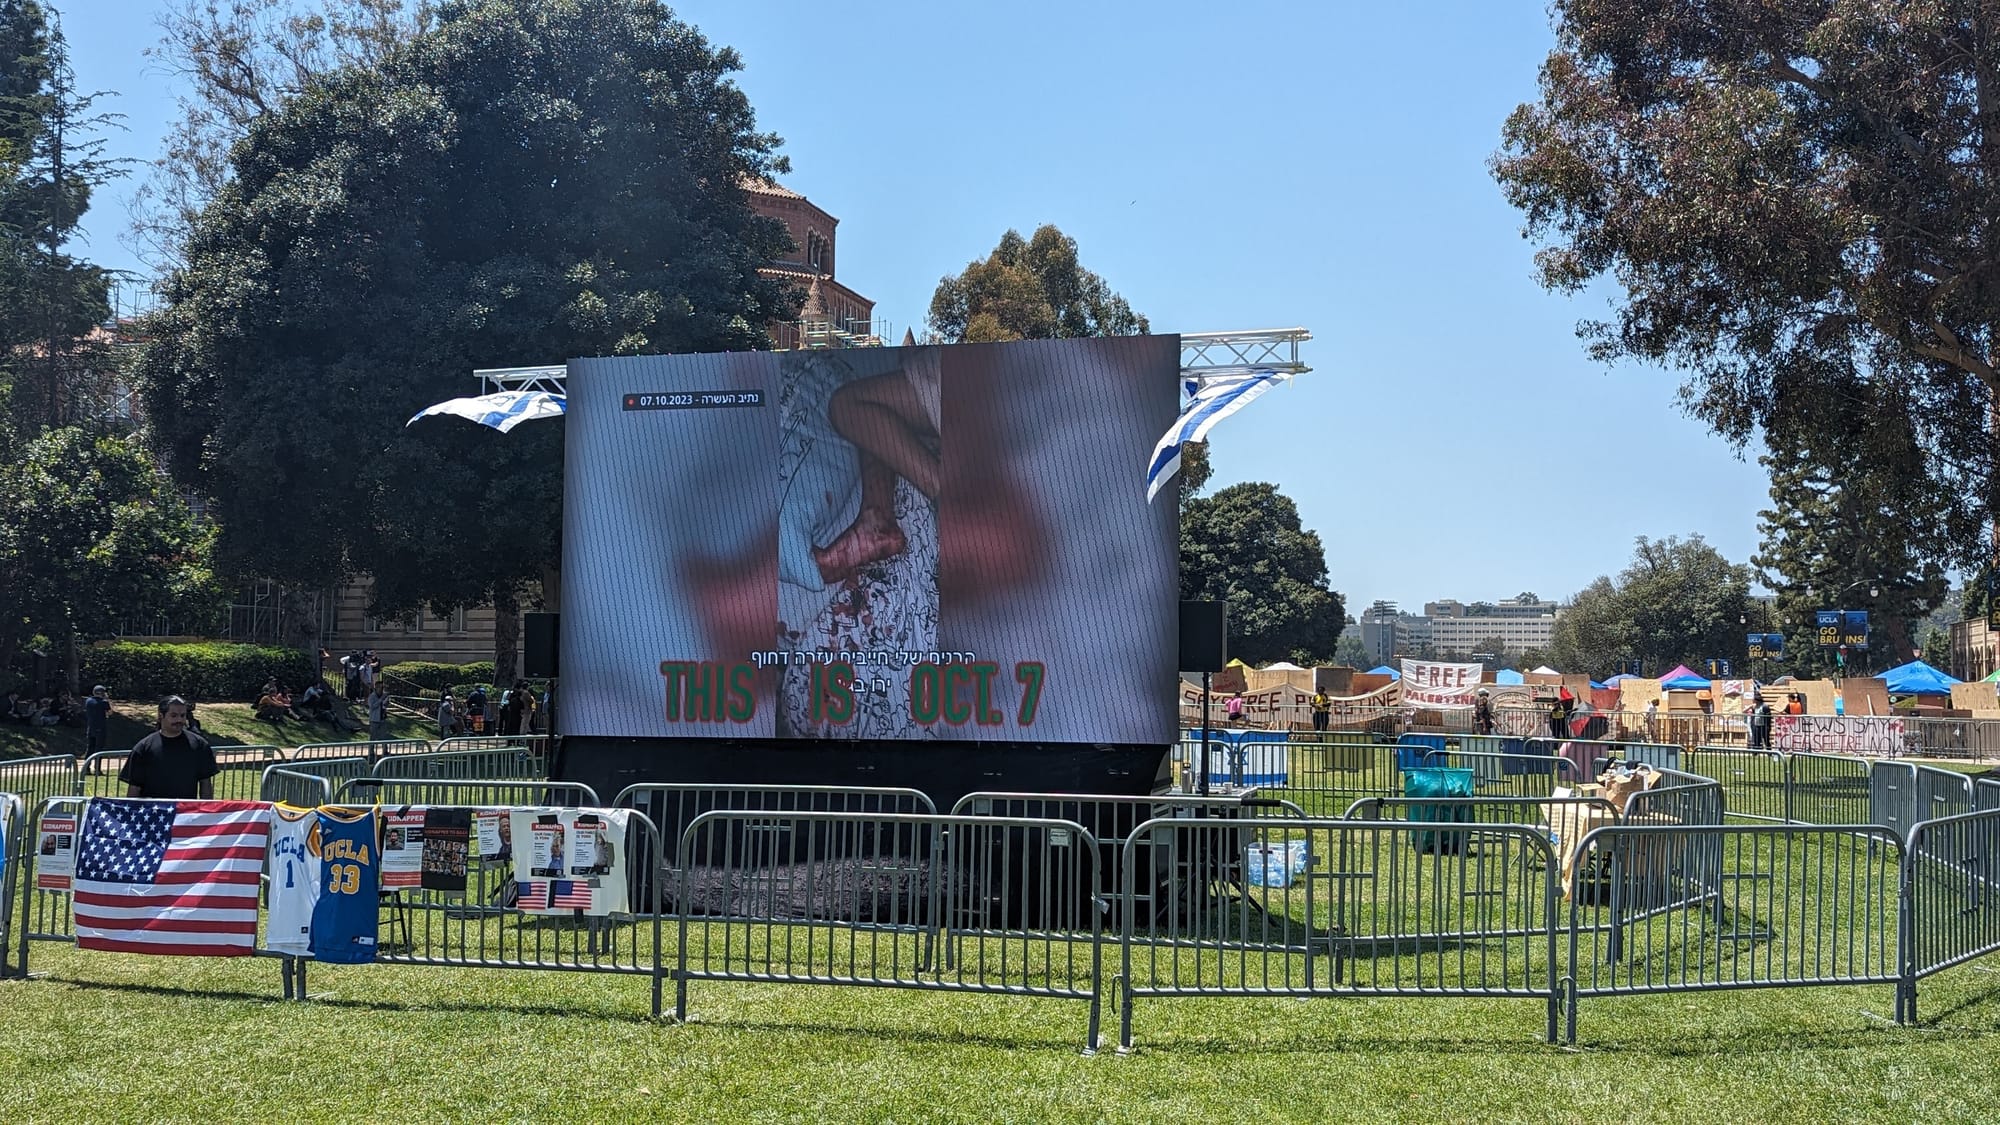 Very large screen showing gruesome images with the text "this is oct 7", surrounded by barriers and nobody around 